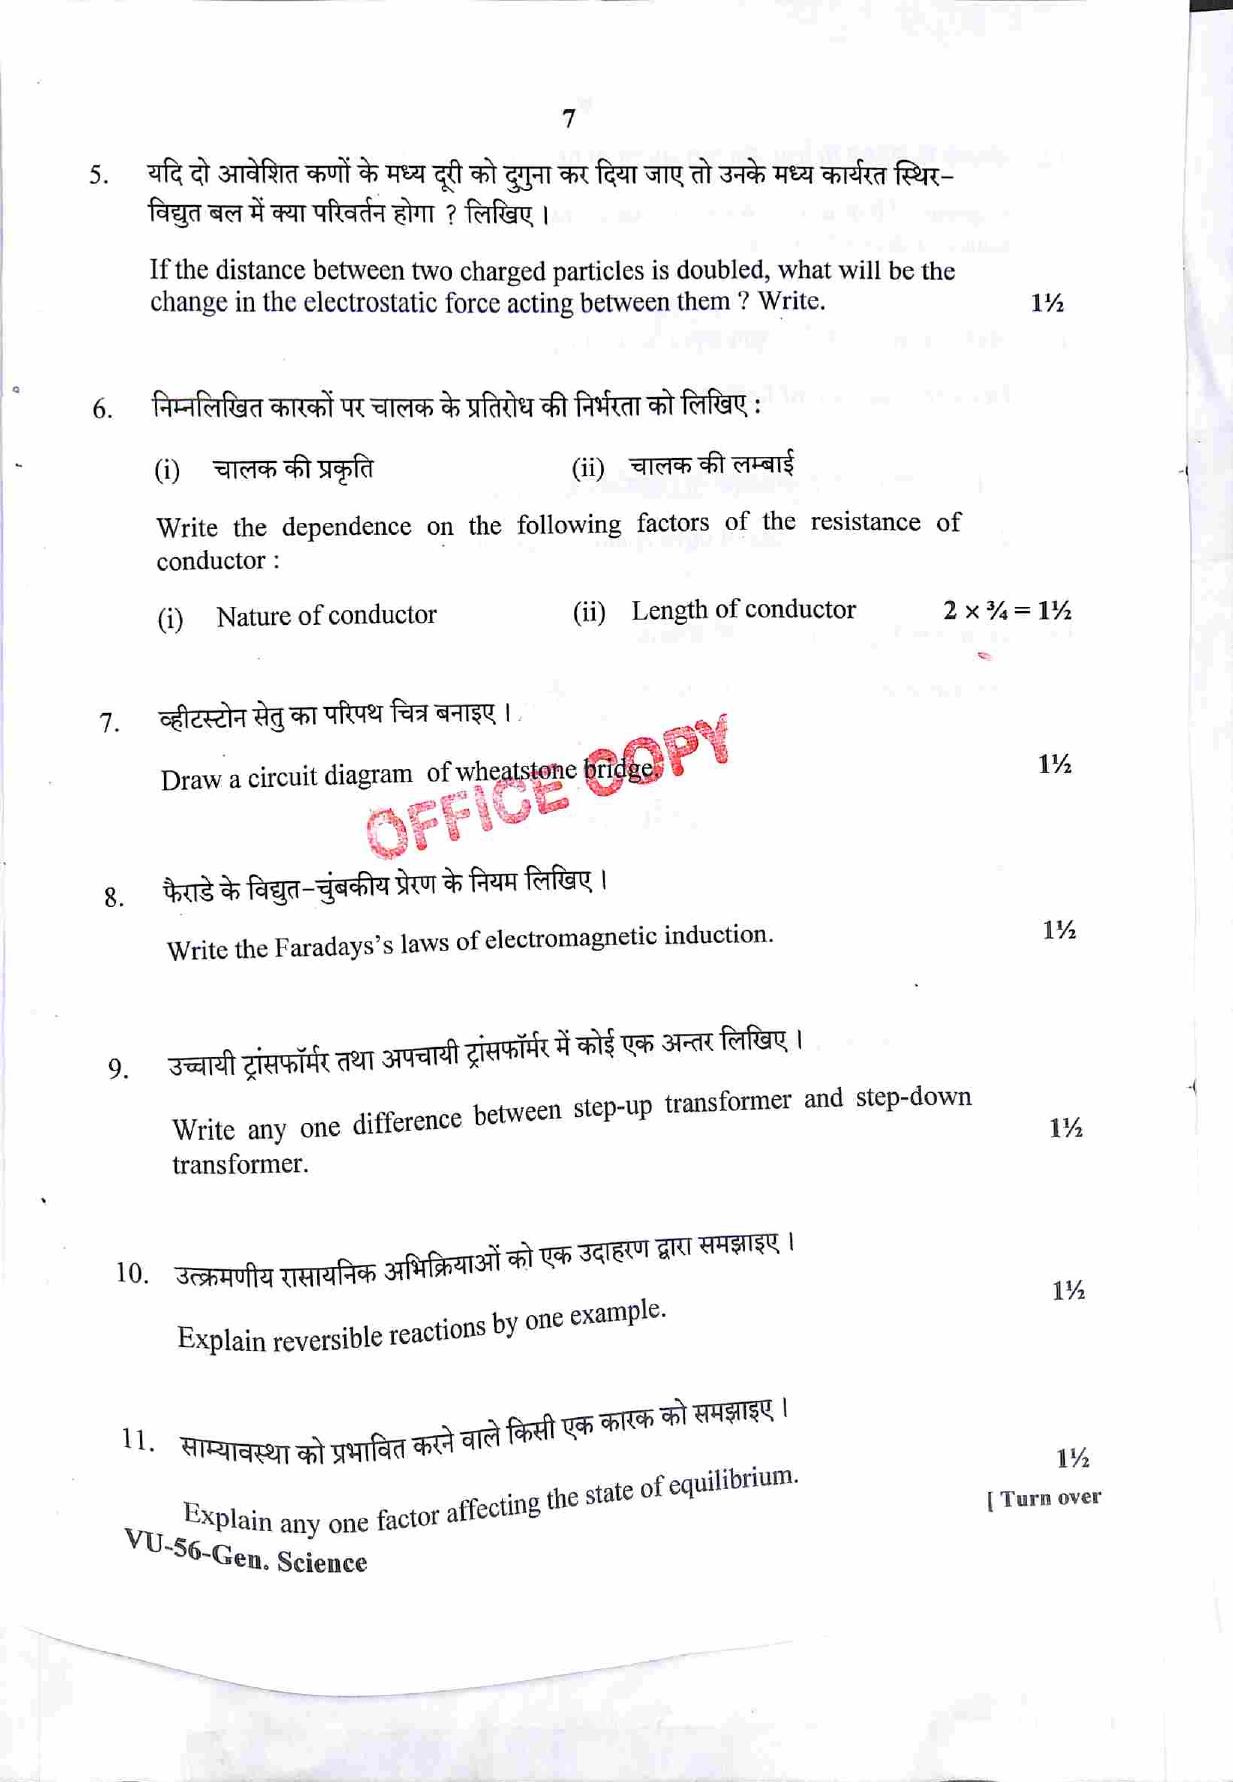 RBSE 2022 General Science Upadhyay Question Paper - Page 8